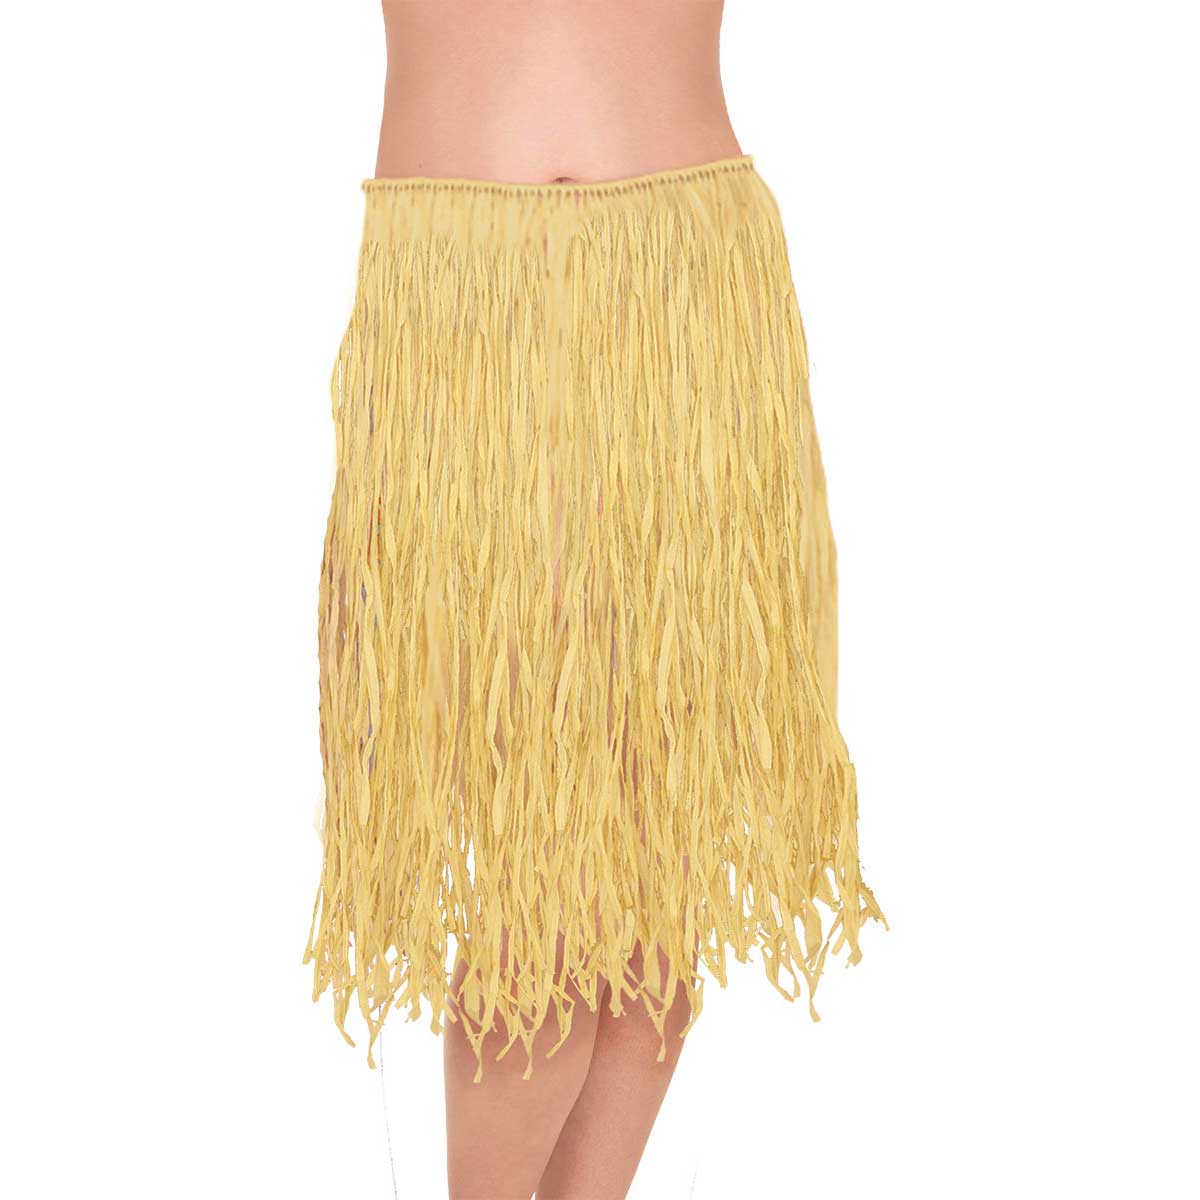 Adult Natural Grass Skirt 28 x 31in Costumes & Apparel - Party Centre